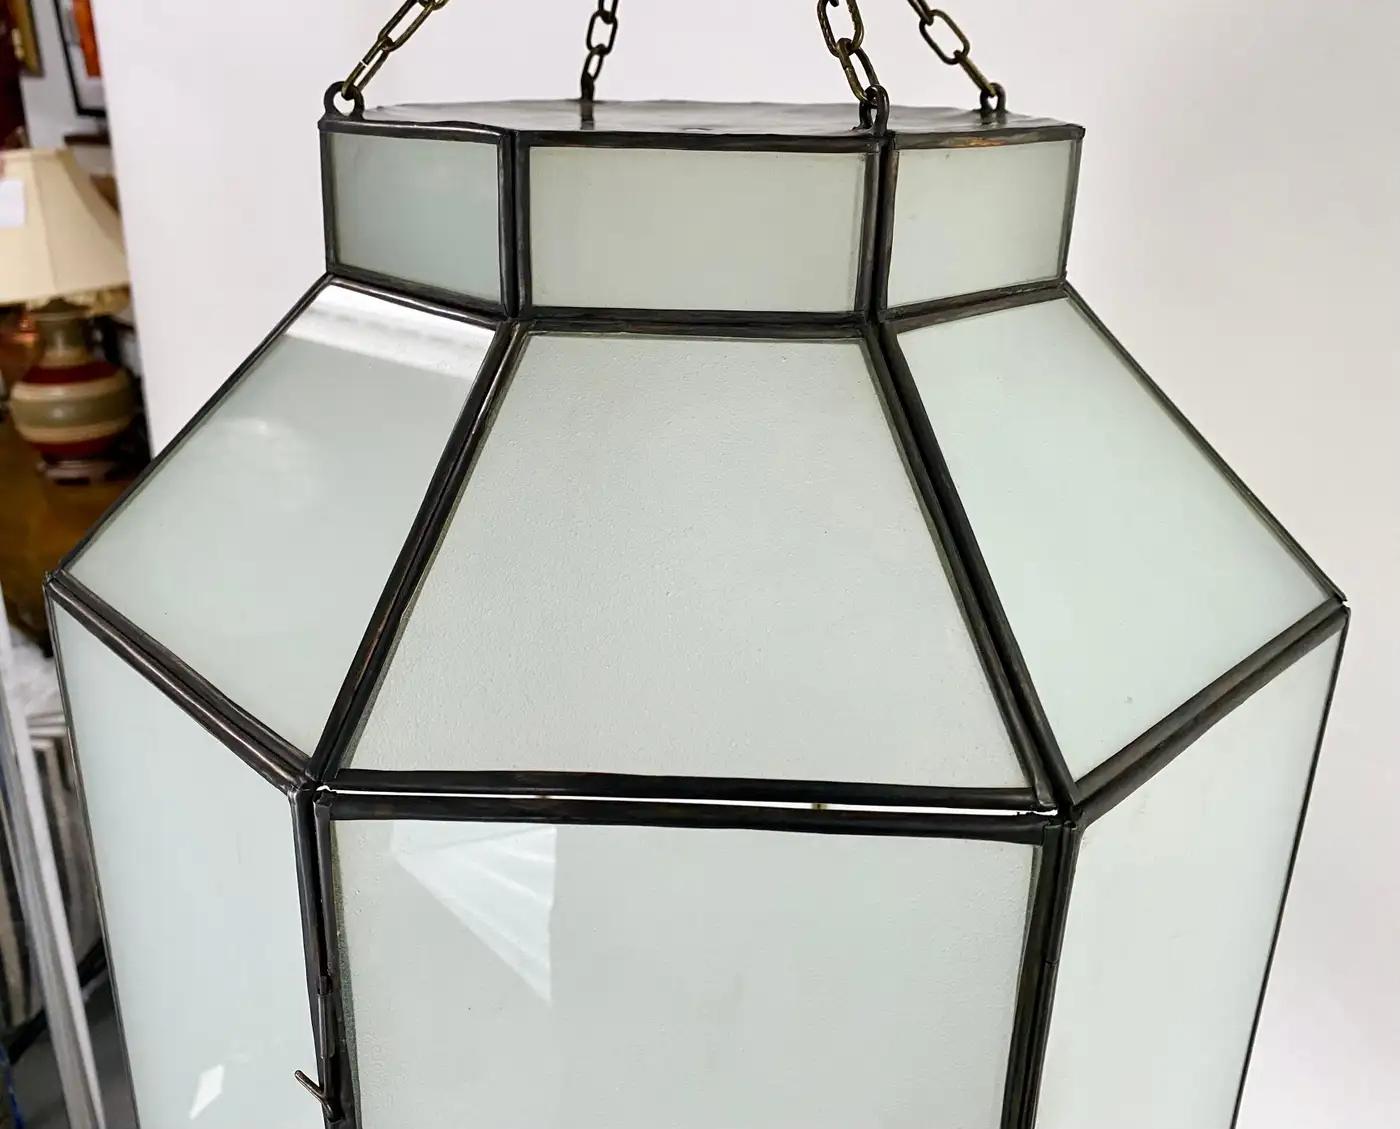 An Art Deco style chandelier, pendant or lantern. Featuring a stylish octagonal shape, the chandelier or pendant is finely hand-made of individual sandblasted frosted milk glass panels and patinated bronze frame. The octagonal shaped pendant has a